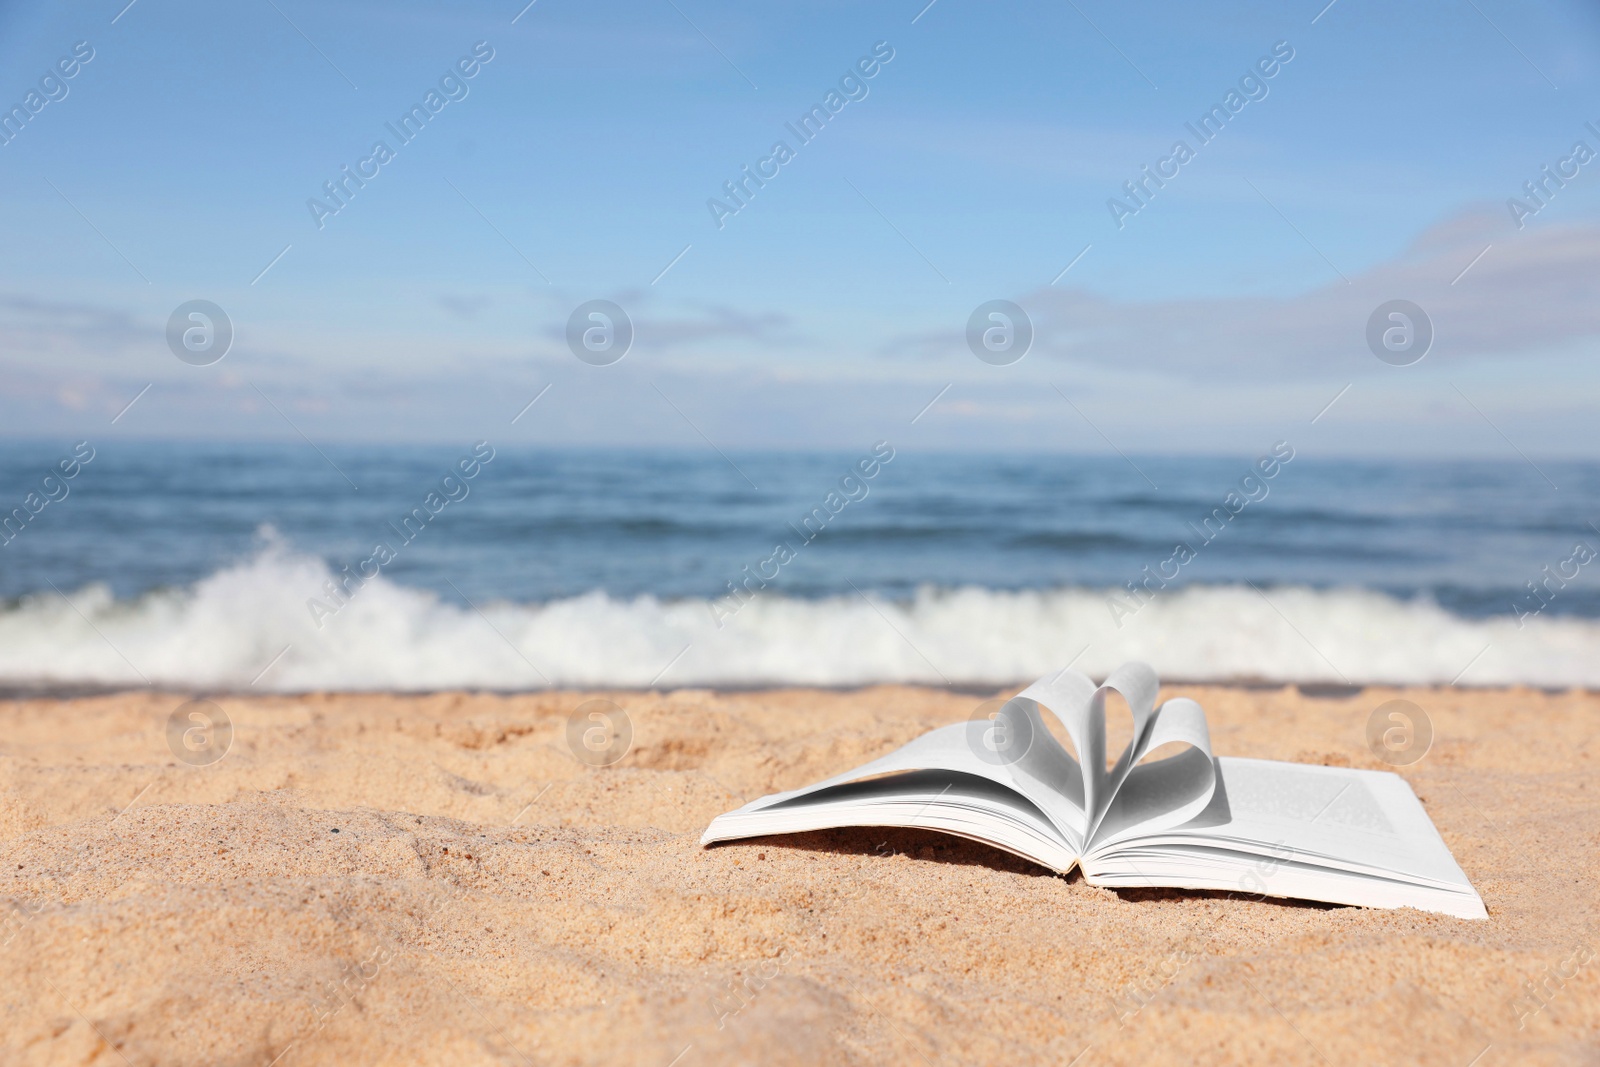 Photo of Open book on sandy beach near sea. Space for text